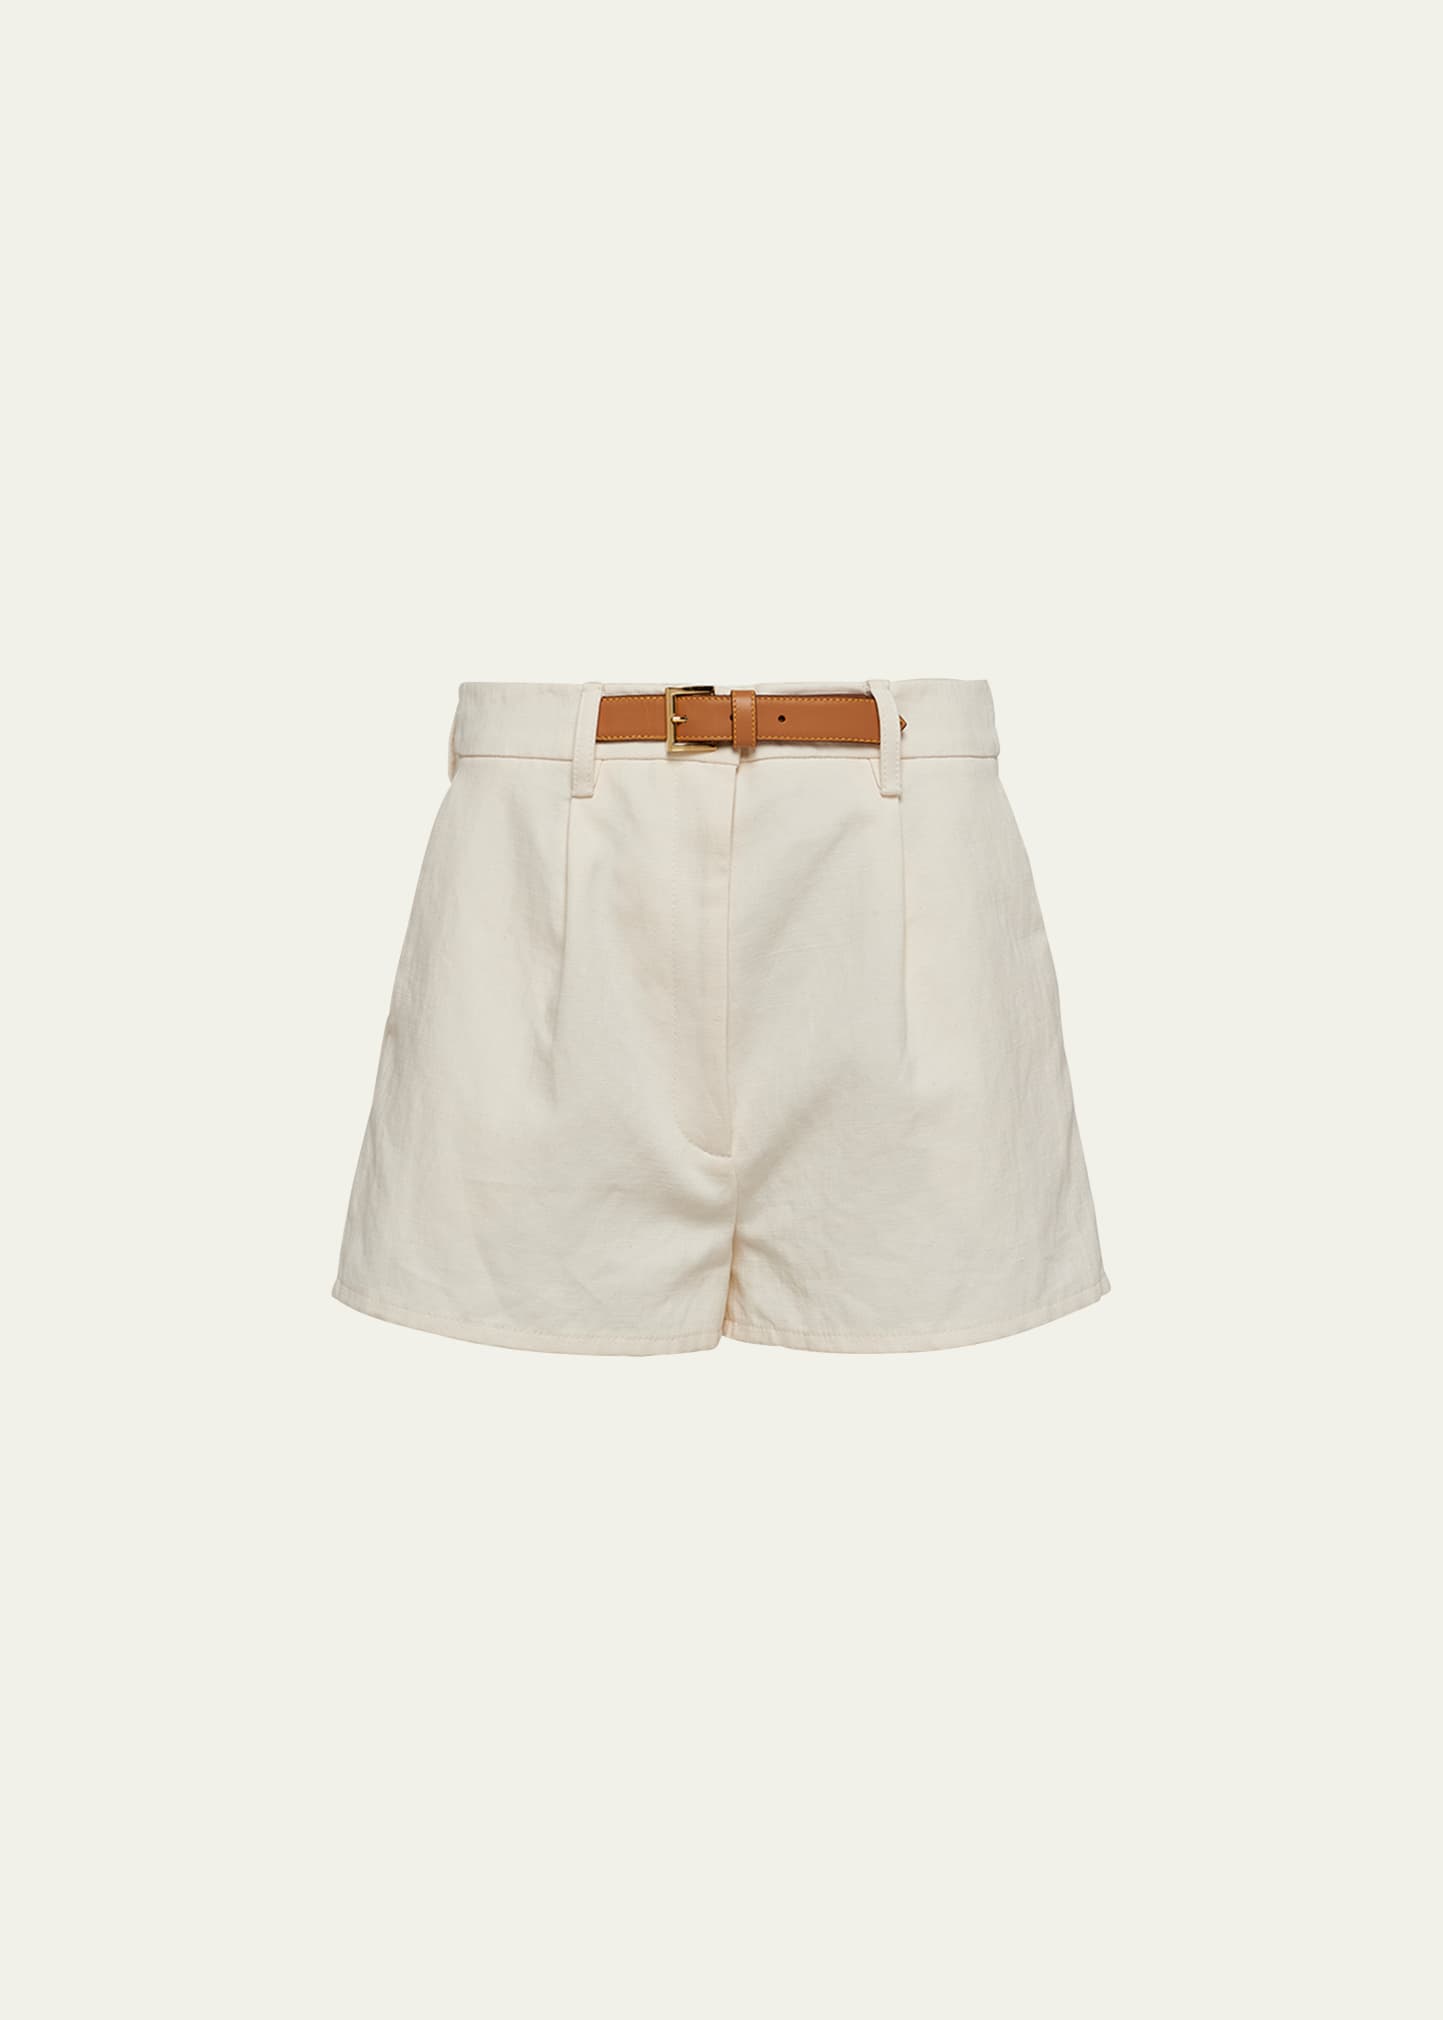 PRADA CANVAS LEATHER BELTED SHORTS